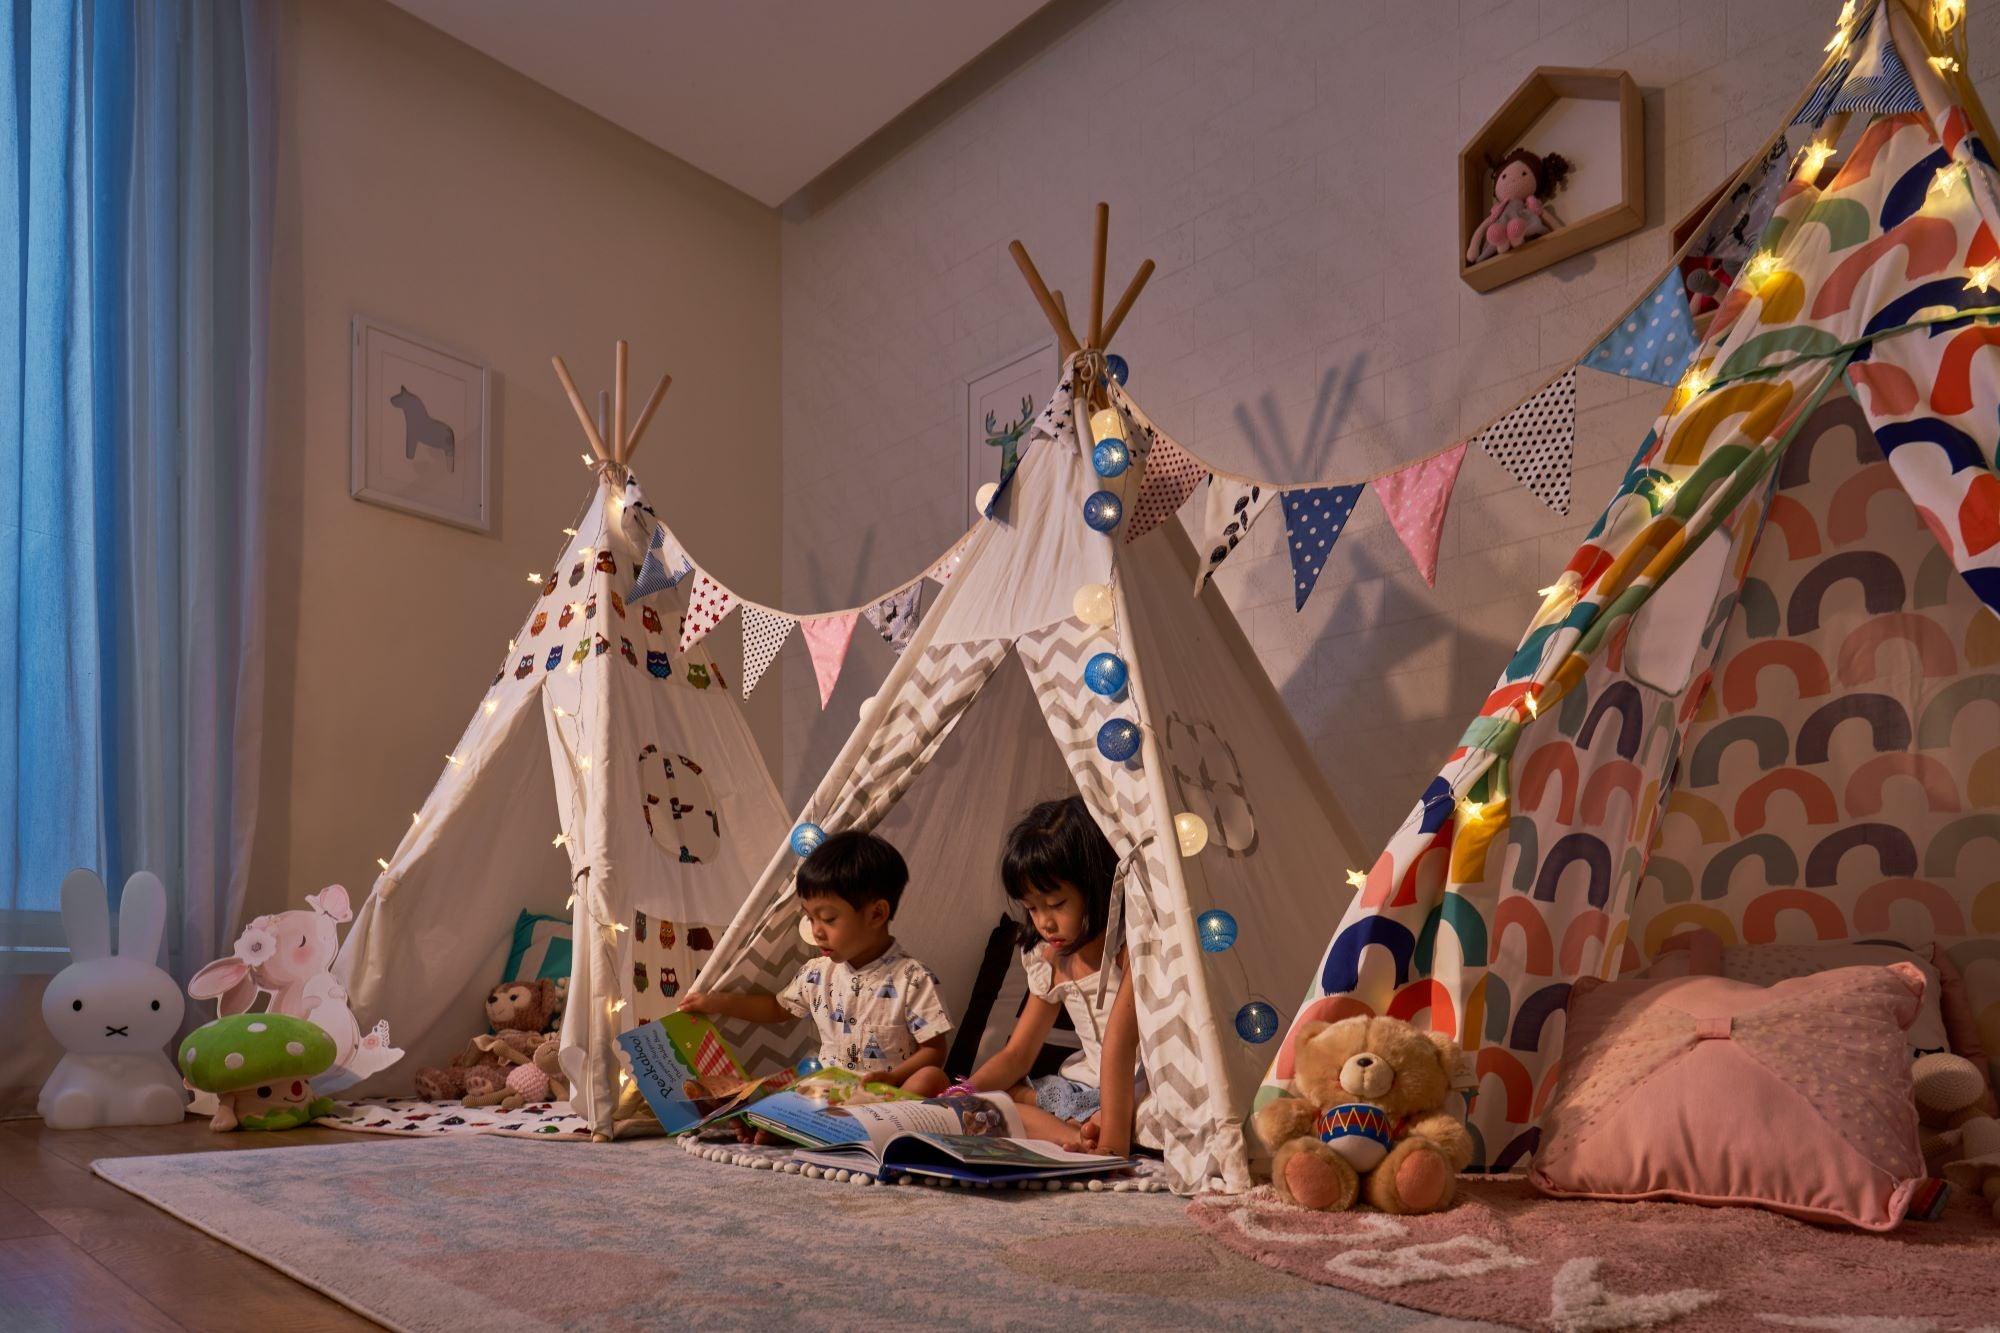 PETIT Panda Pink Teepee with lights (mat sold separately) - Kids Haven